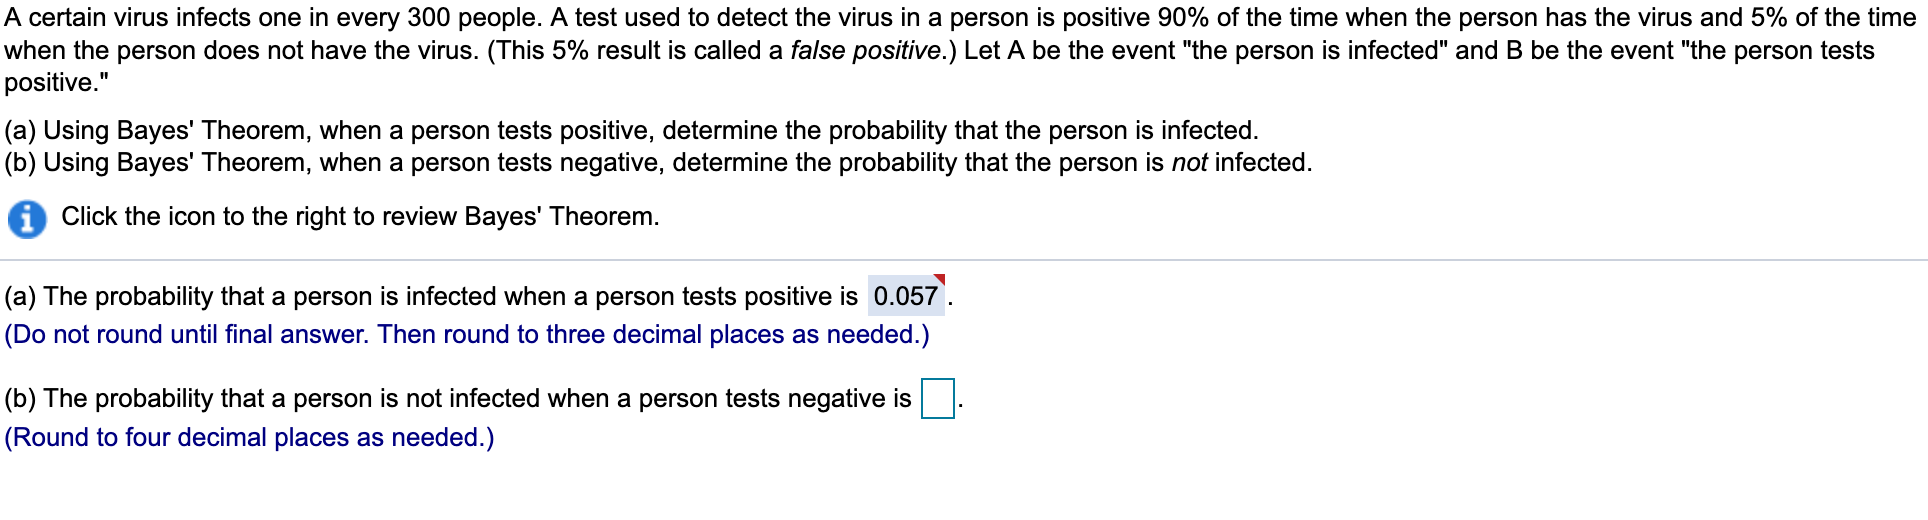 A certain virus infects one in every 300 people. A test used to detect the virus in a person is positive 90% of the time when the person has the virus and 5% of the time
when the person does not have the virus. (This 5% result is called a false positive.) Let A be the event "the person is infected" and B be the event "the person tests
positive."
(a) Using Bayes' Theorem, when a person tests positive, determine the probability that the person is infected.
(b) Using Bayes' Theorem, when a person tests negative, determine the probability that the person is not infected
Click the icon to the right to review Bayes' Theorem.
(a) The probability that a person is infected when a person tests positive is 0.057
(Do not round until final answer. Then round to three decimal places as needed.)
(b) The probability that a person is not infected when a person tests negative is
(Round to four decimal places as needed.)
